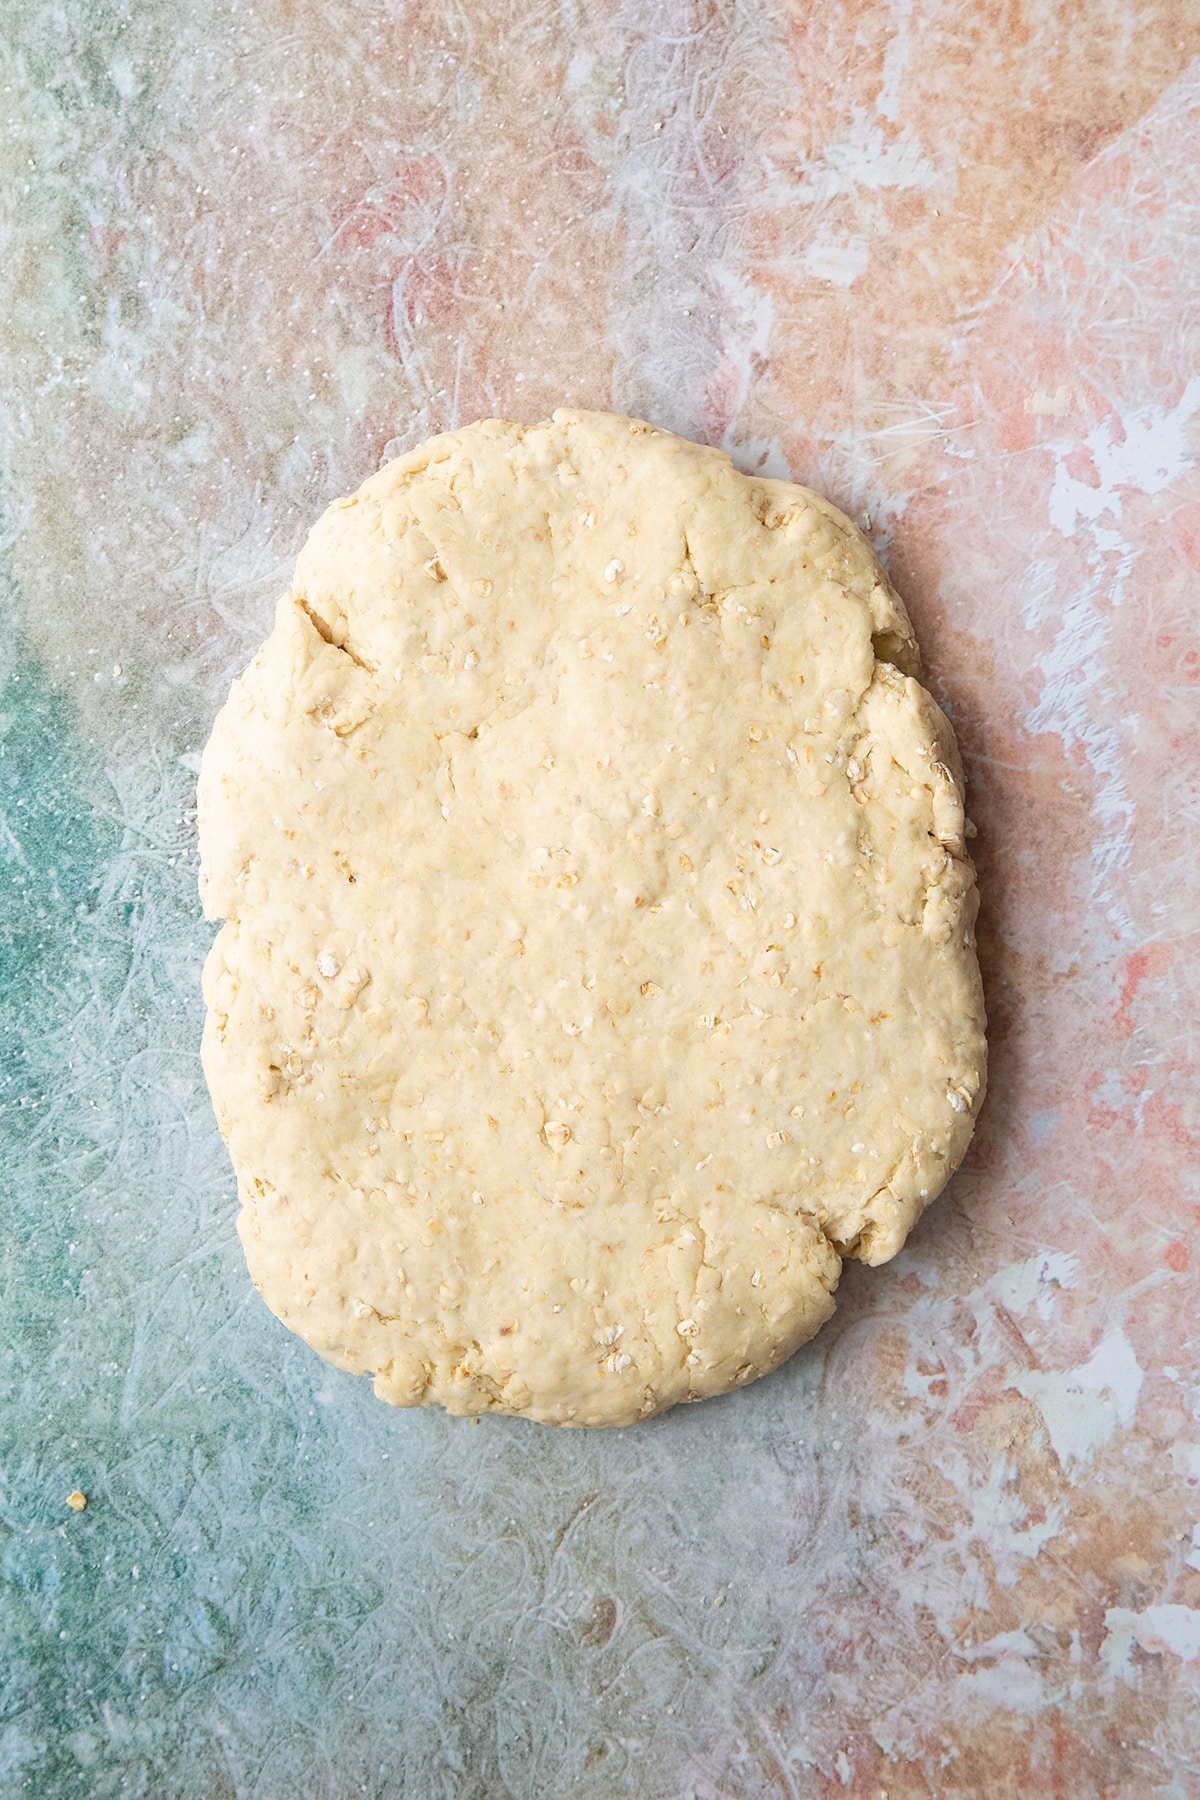 Oatmeal scone dough pressed to a thick slab.